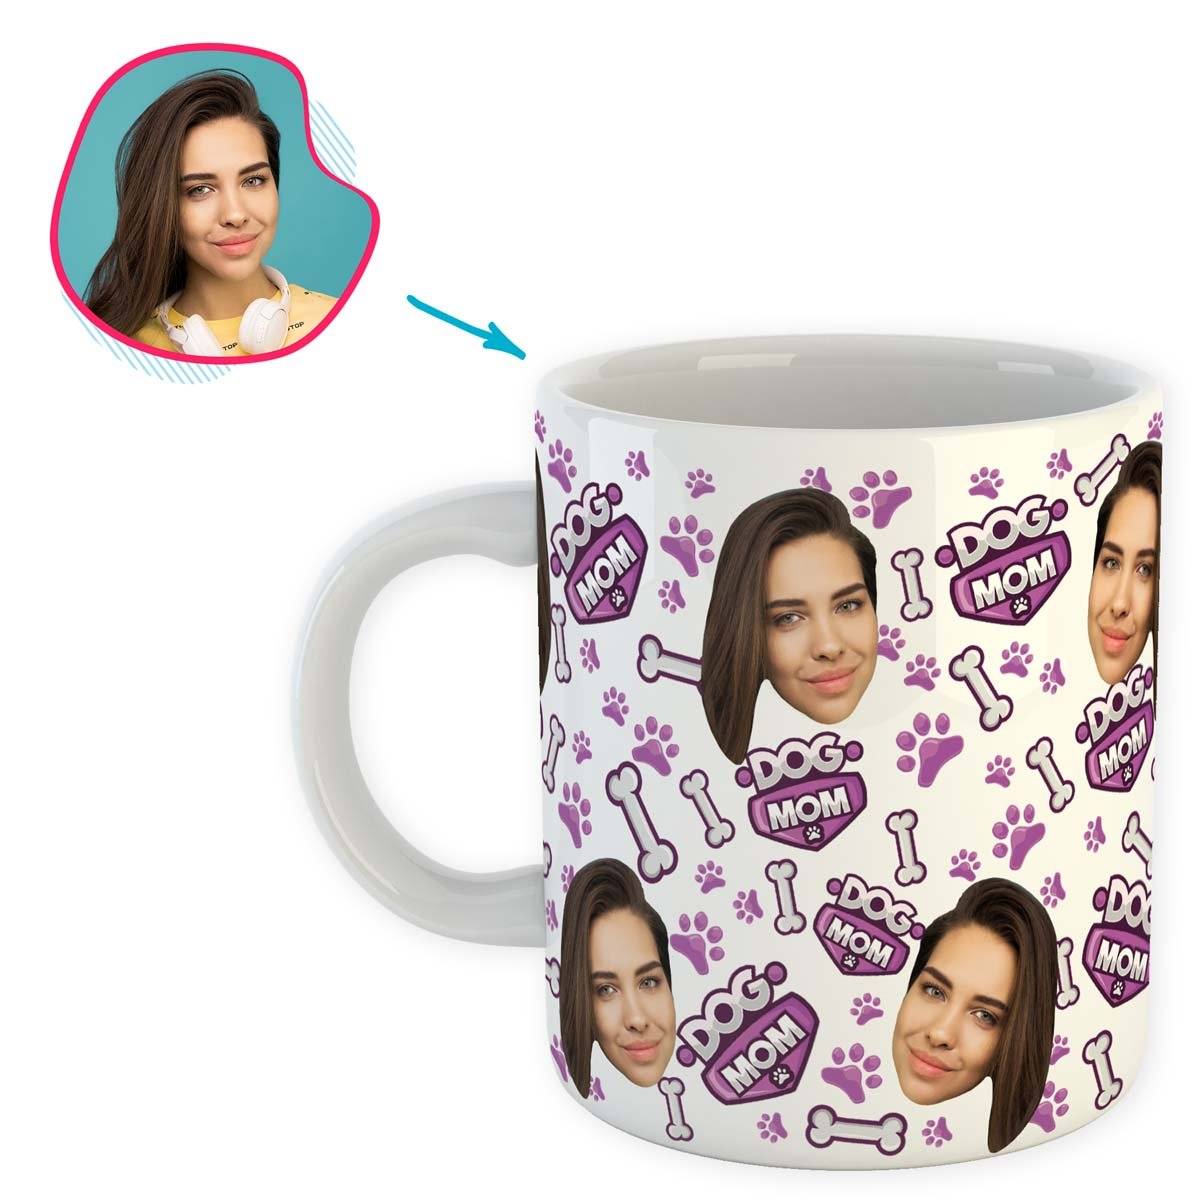 white Dog Mom mug personalized with photo of face printed on it